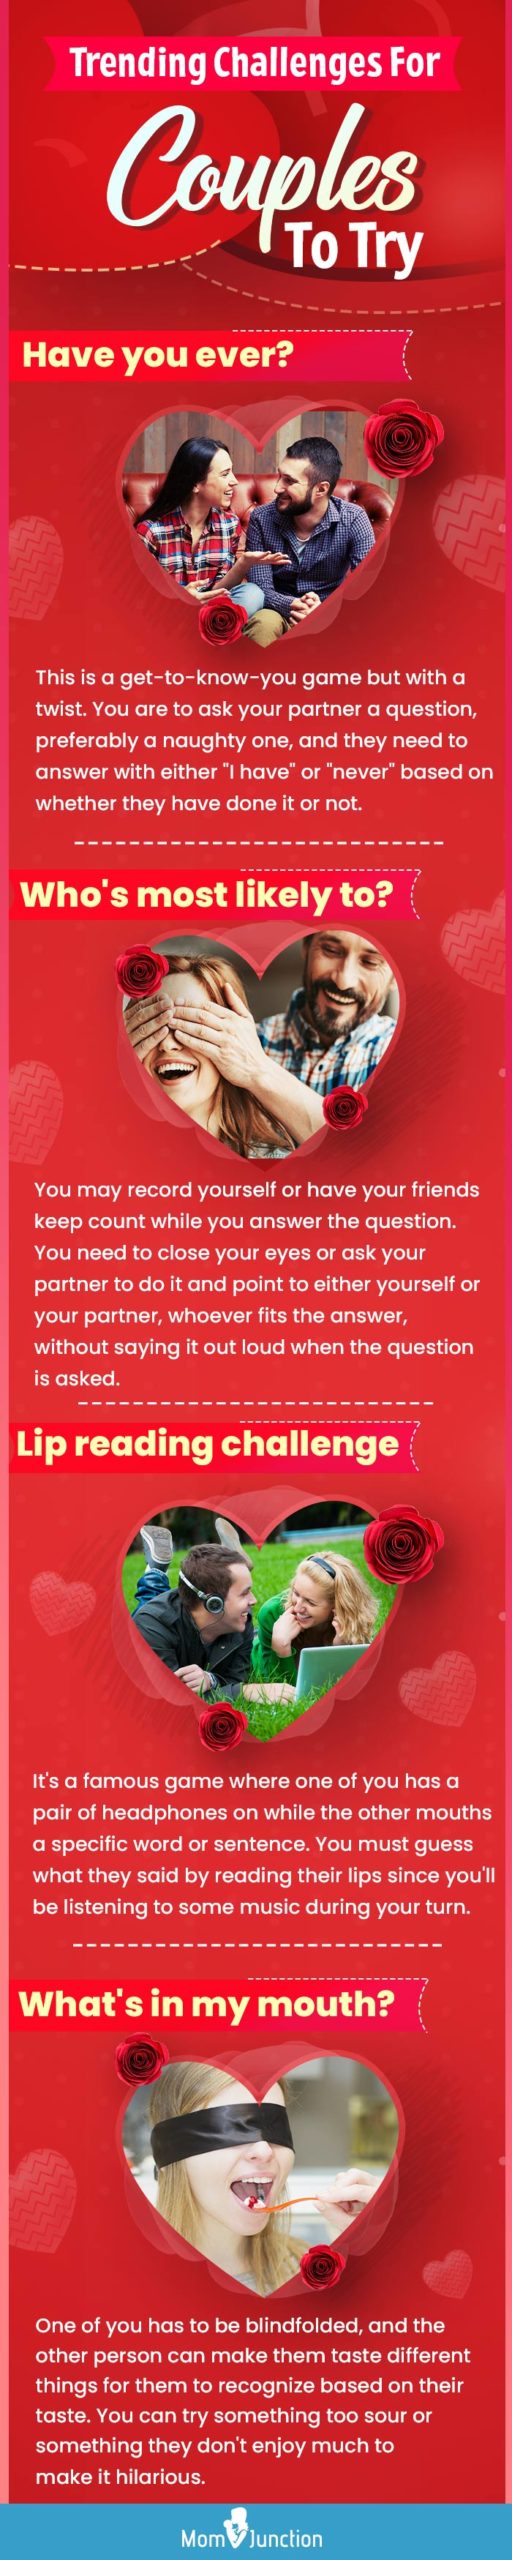 trending challenges for couples to try (infographic)